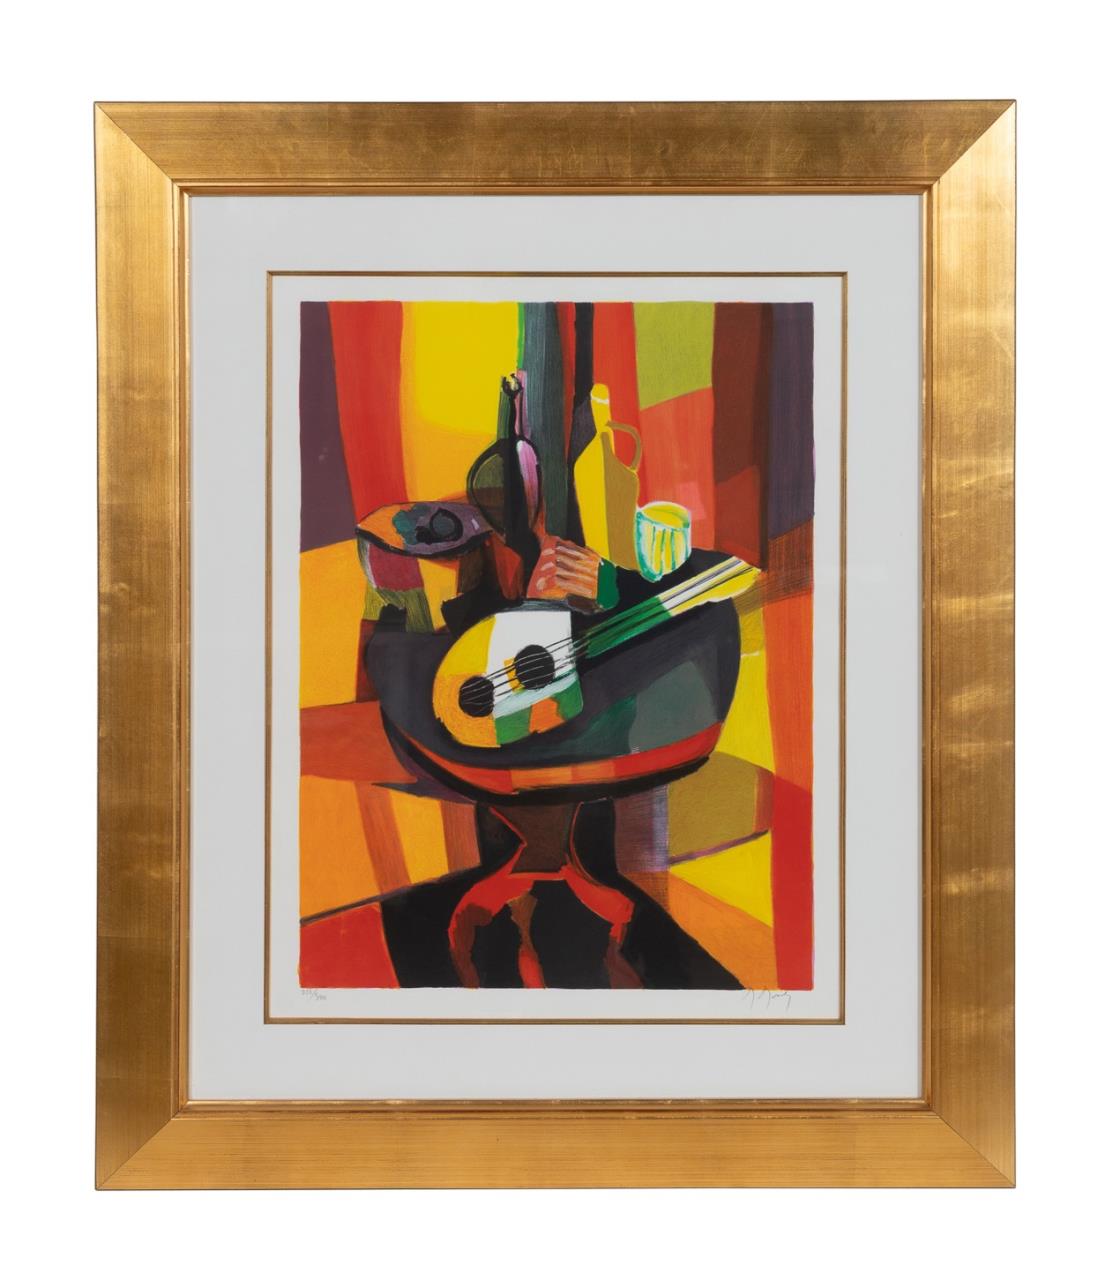 M MOULY GUITAR STILL LIFE LITHOGRAPH 2bfc92